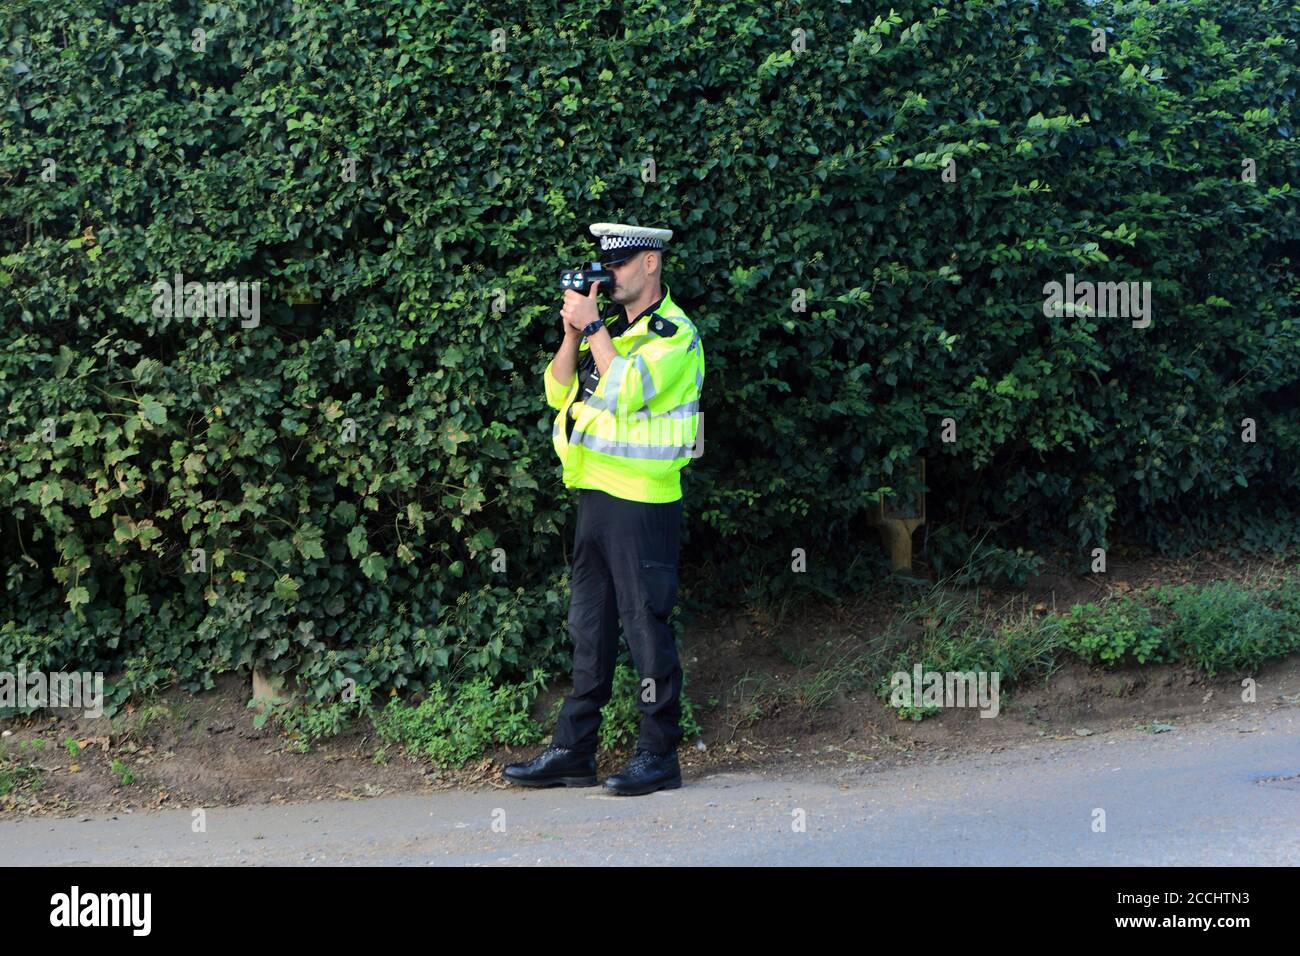 Policeman, operating speed camera, hand held, roadside, speed trap, for vehicles, Norfolk, England, UK Stock Photo